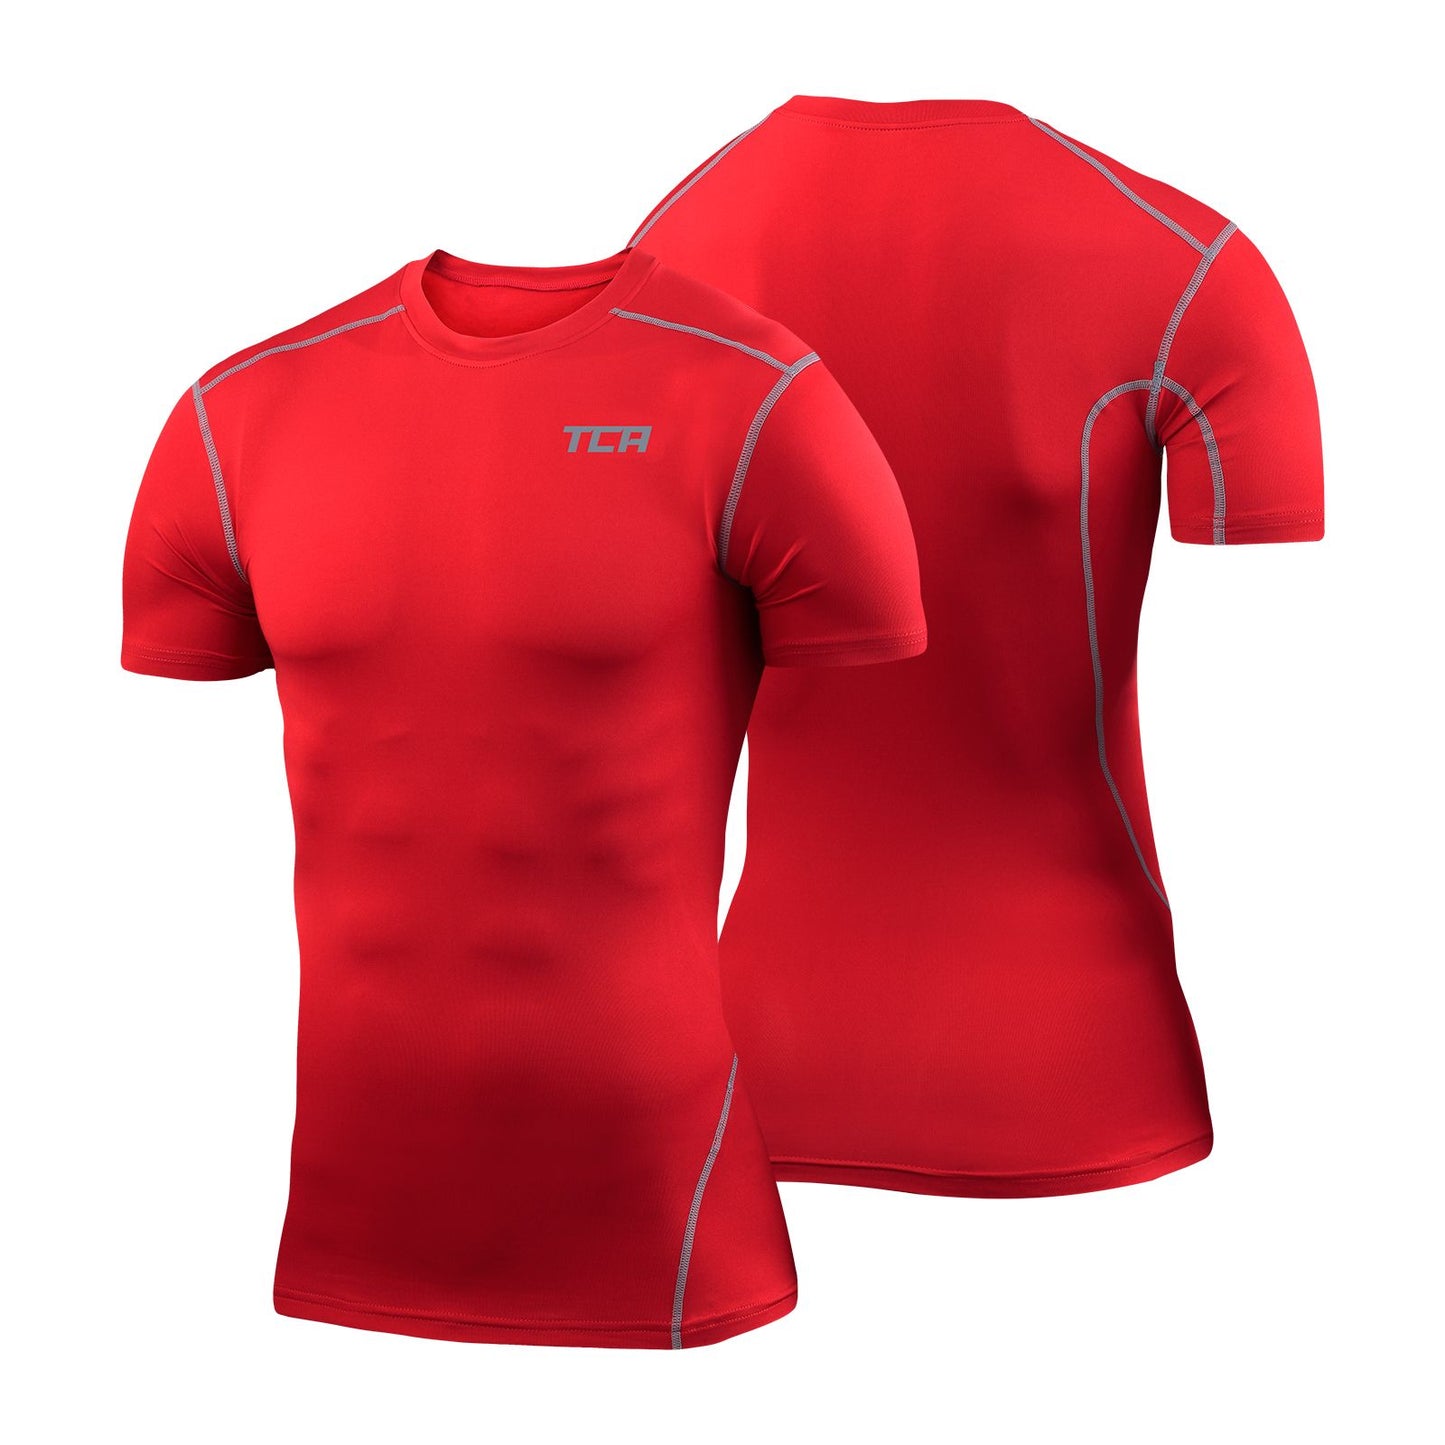 Pro Performance Compression Base Layer Short Sleeve Crew Neck For Men